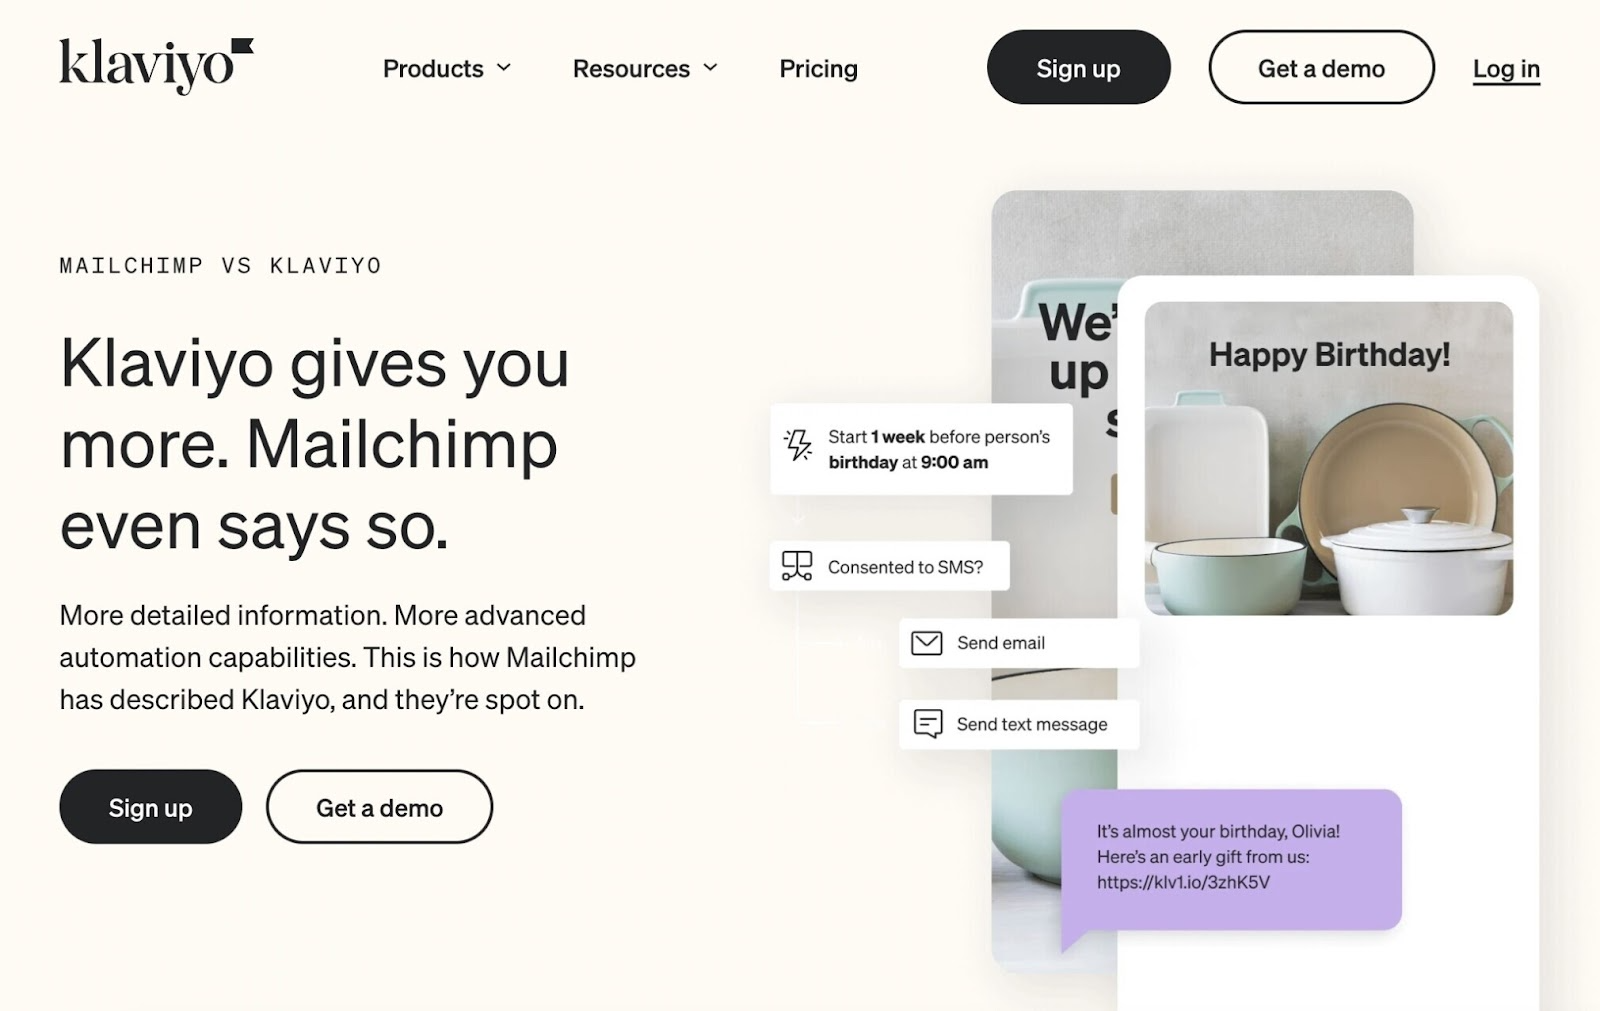 Klaviyo’s landing page highlighting the differences with Mailchimp